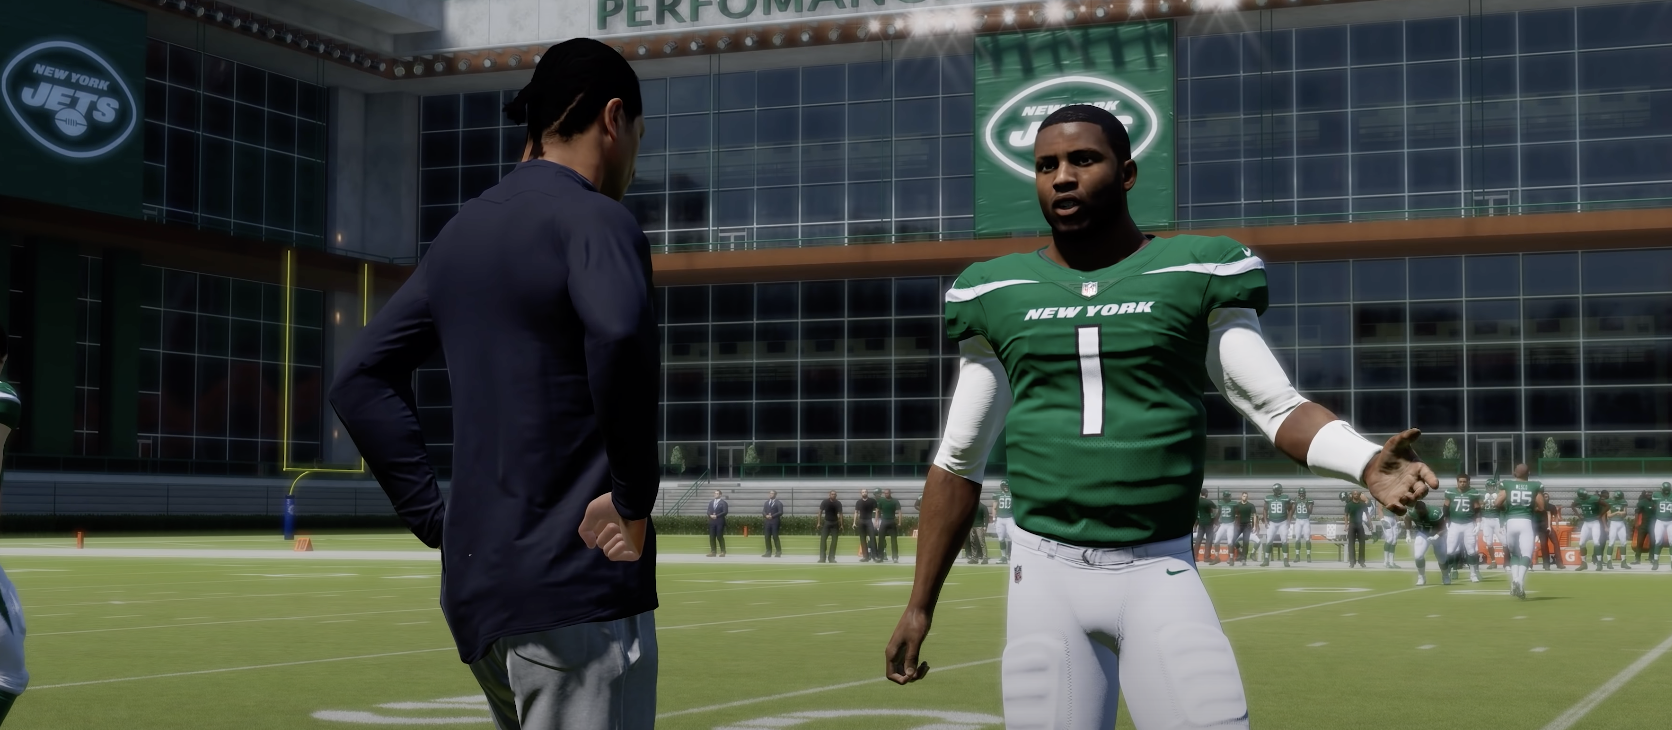 madden nfl 22 face of the franchise video - Operation Sports